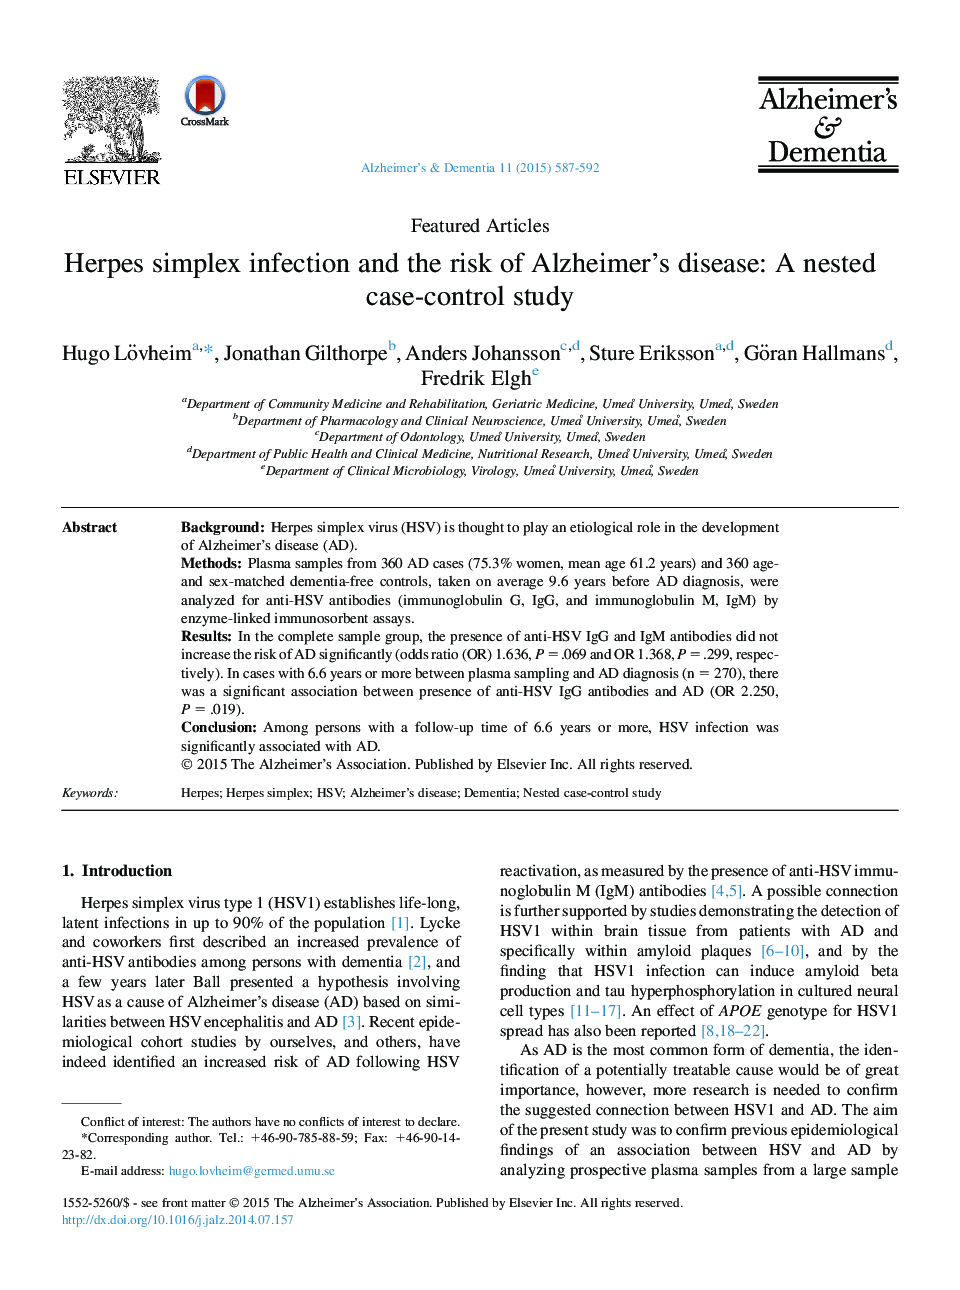 Featured ArticleHerpes simplex infection and the risk of Alzheimer's disease: A nested case-control study